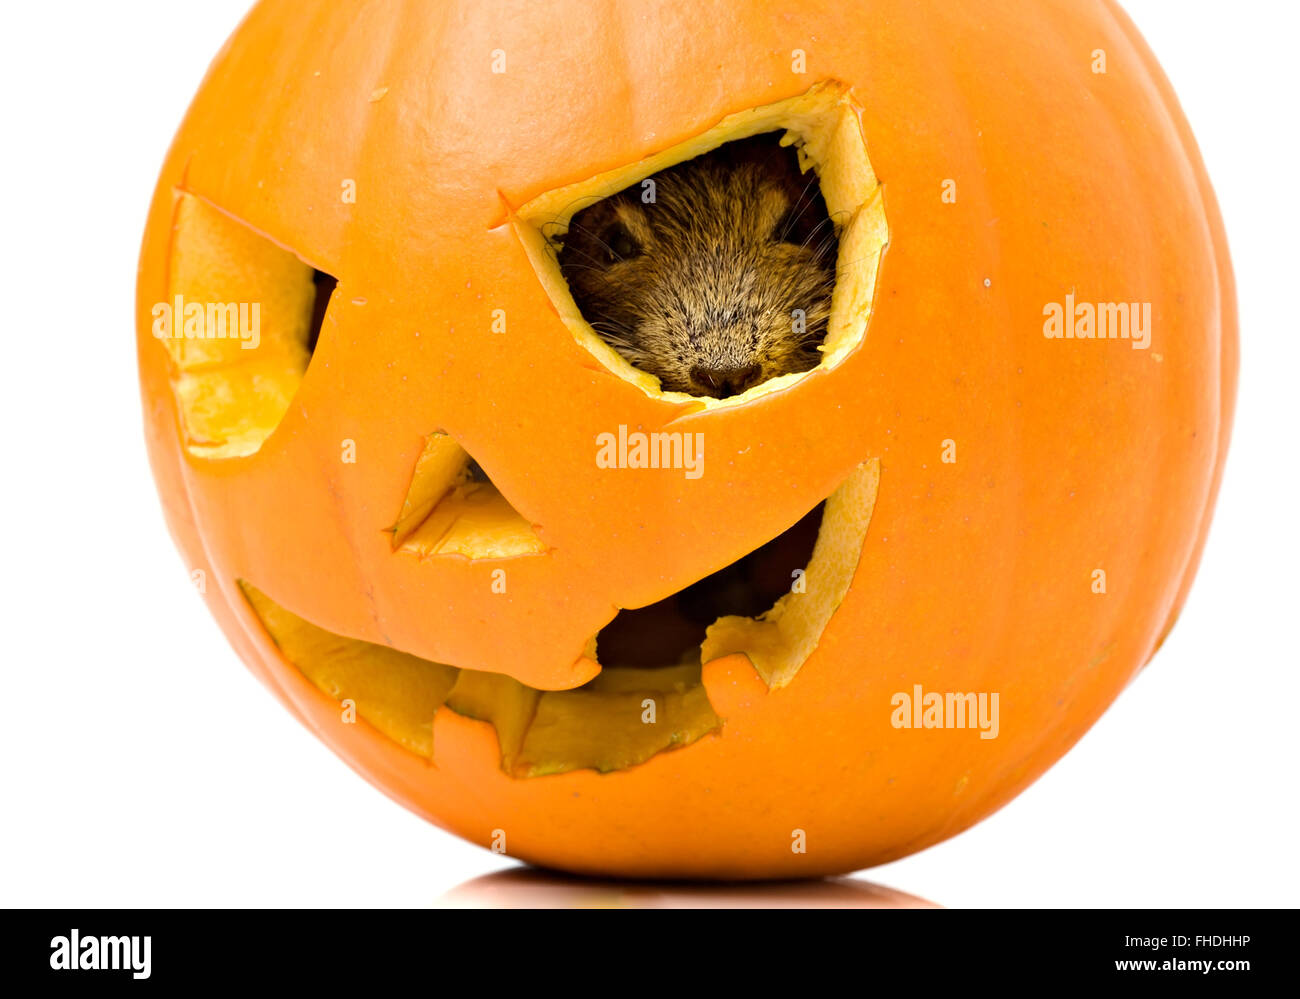 Halloween pumpkin with mouse inside Stock Photo